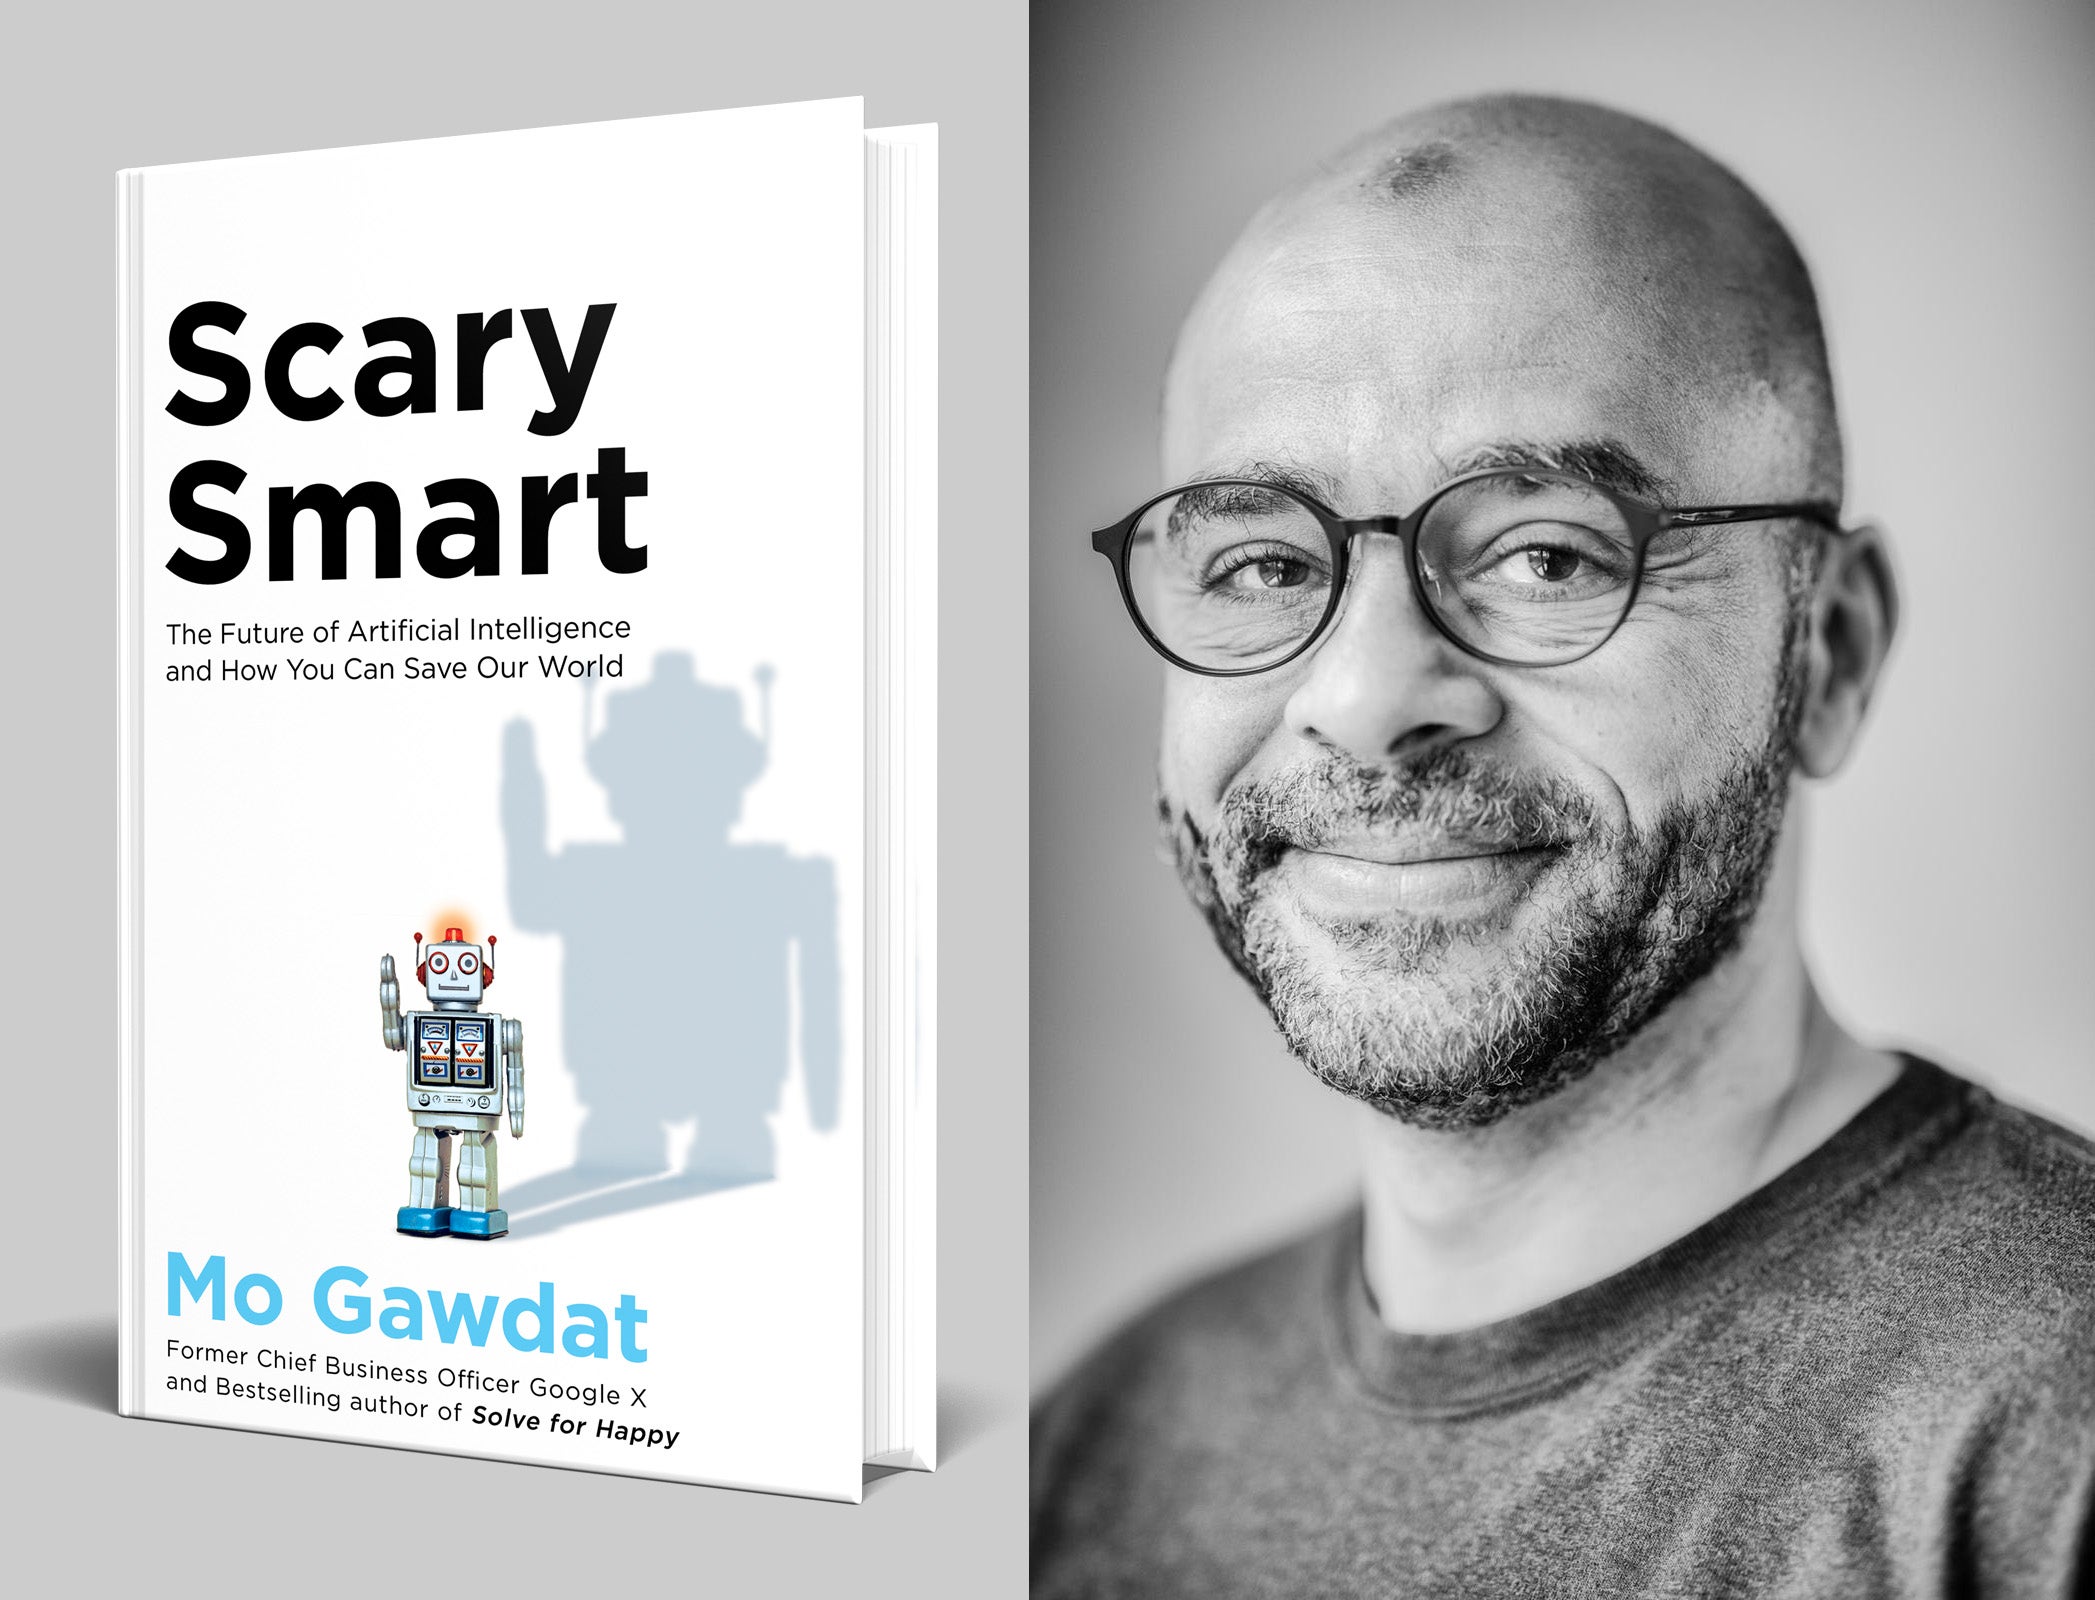 An image of Scary Smart and the author Mo Gawdat